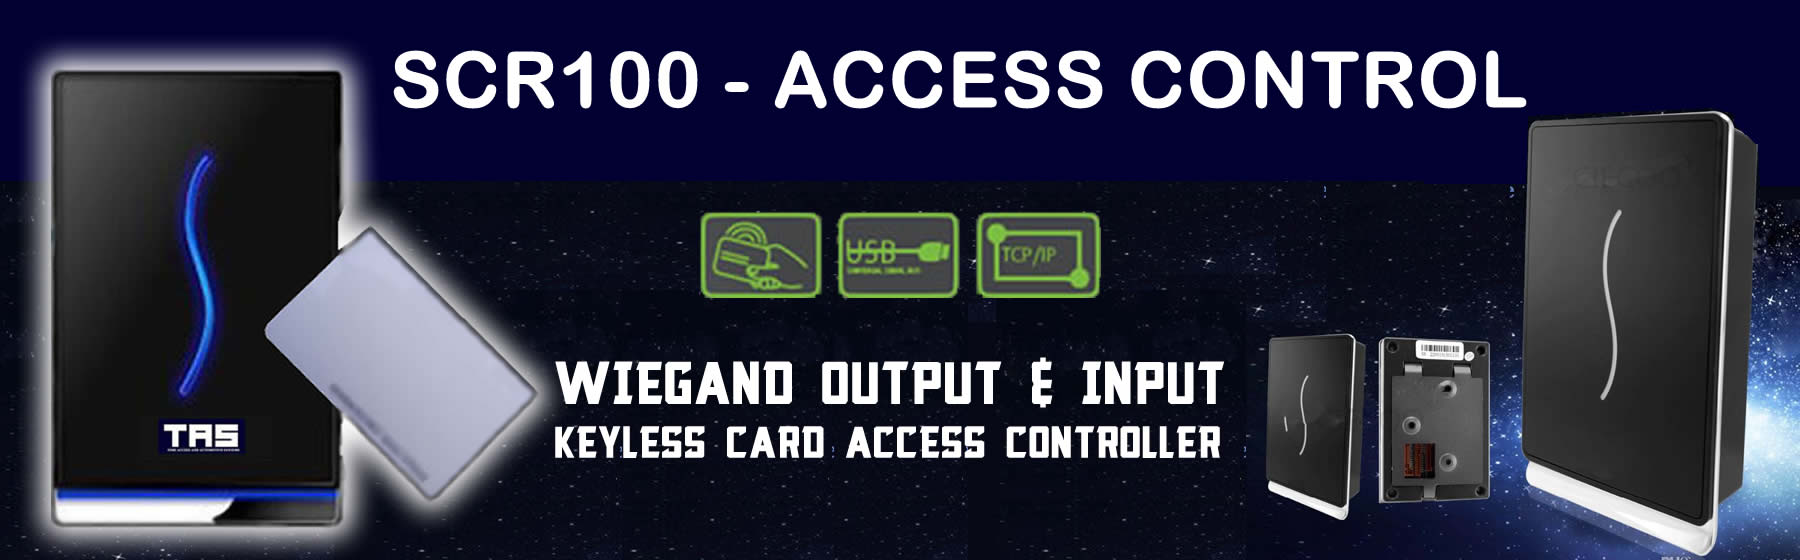 scr100-access-control-wiegand-rfid-product